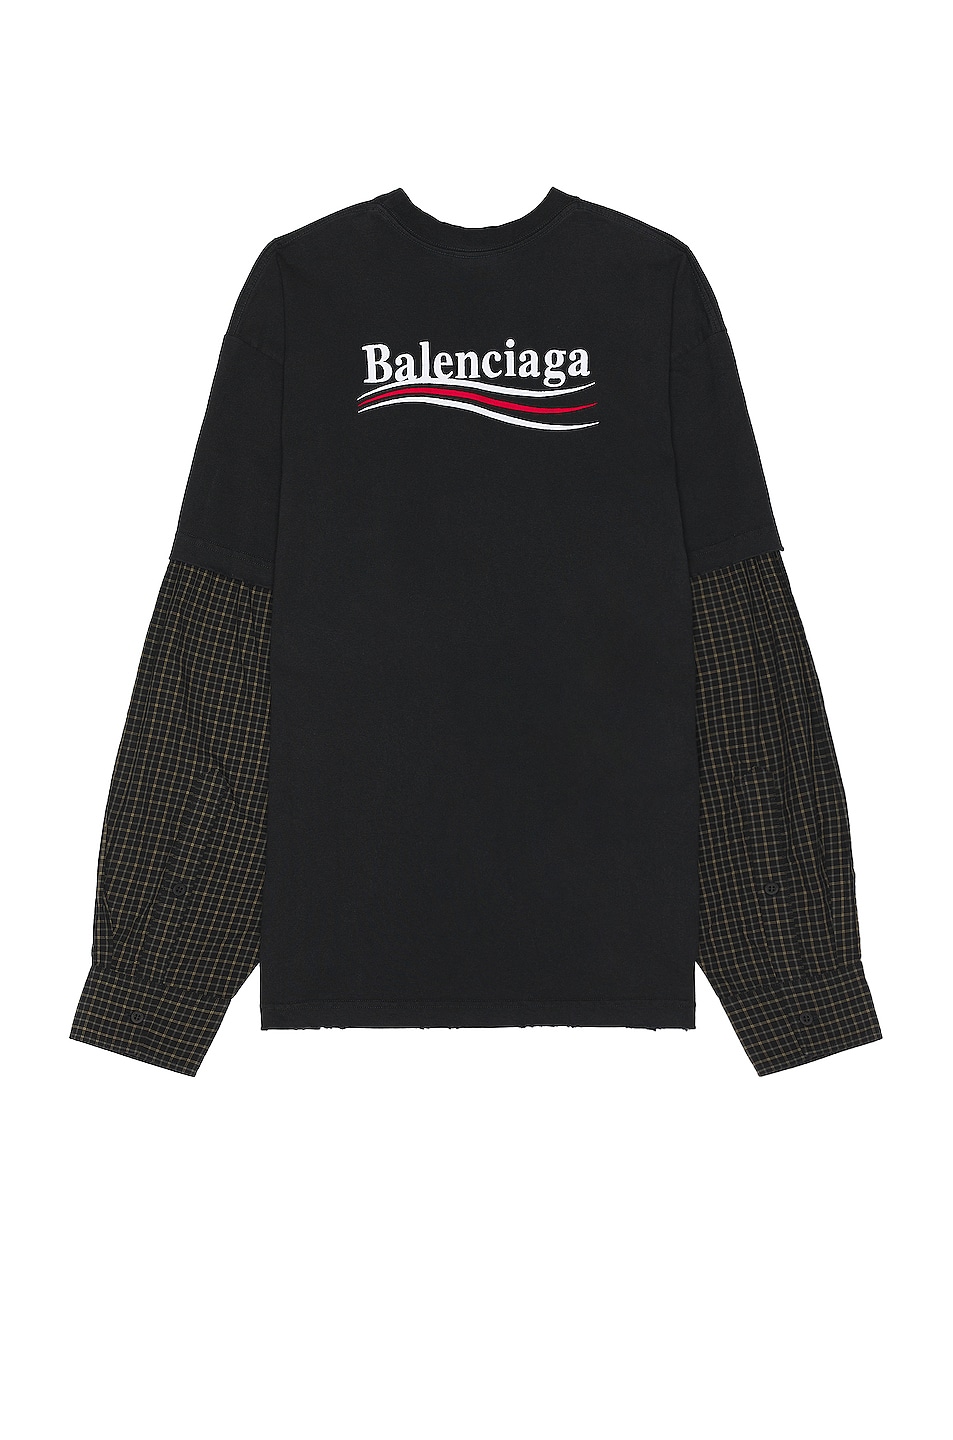 Image 1 of Balenciaga Layered T-shirt in Washed Black, Whte & Red